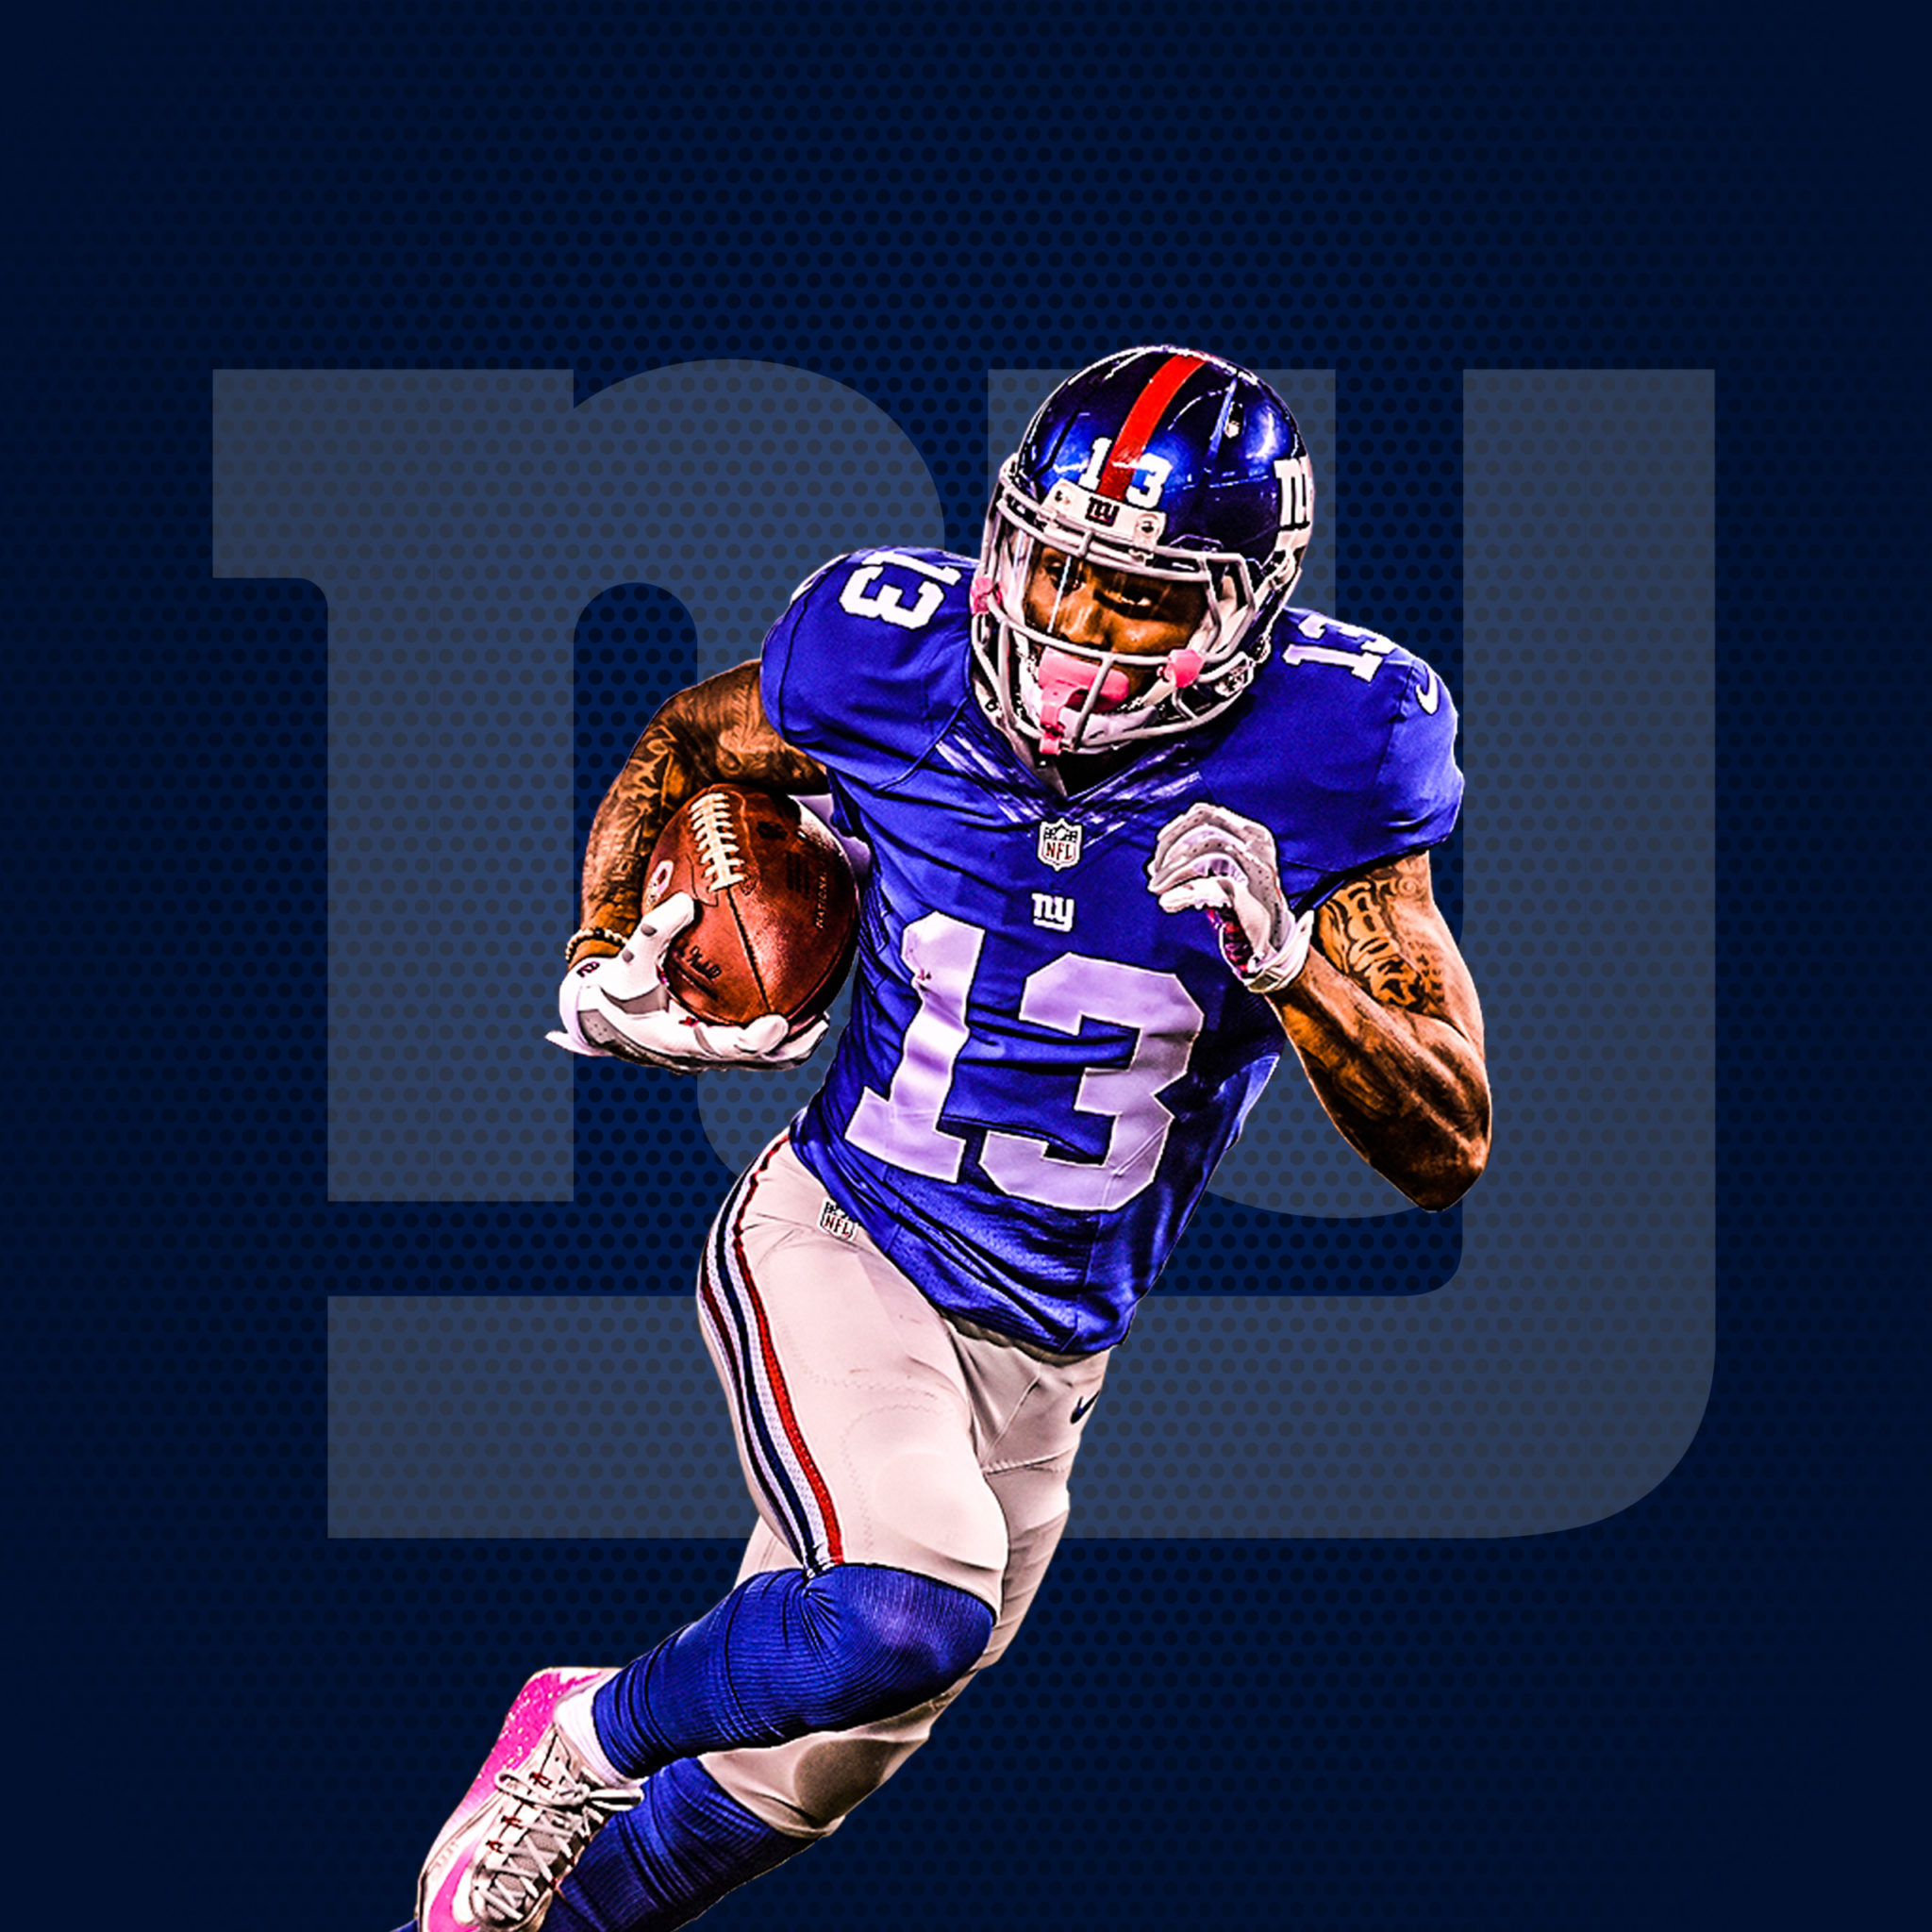 Odell Beckham Jr Real 3d Wallpaper – HD Wallpapers Backgrounds Desktop, iphone & Android Free Download